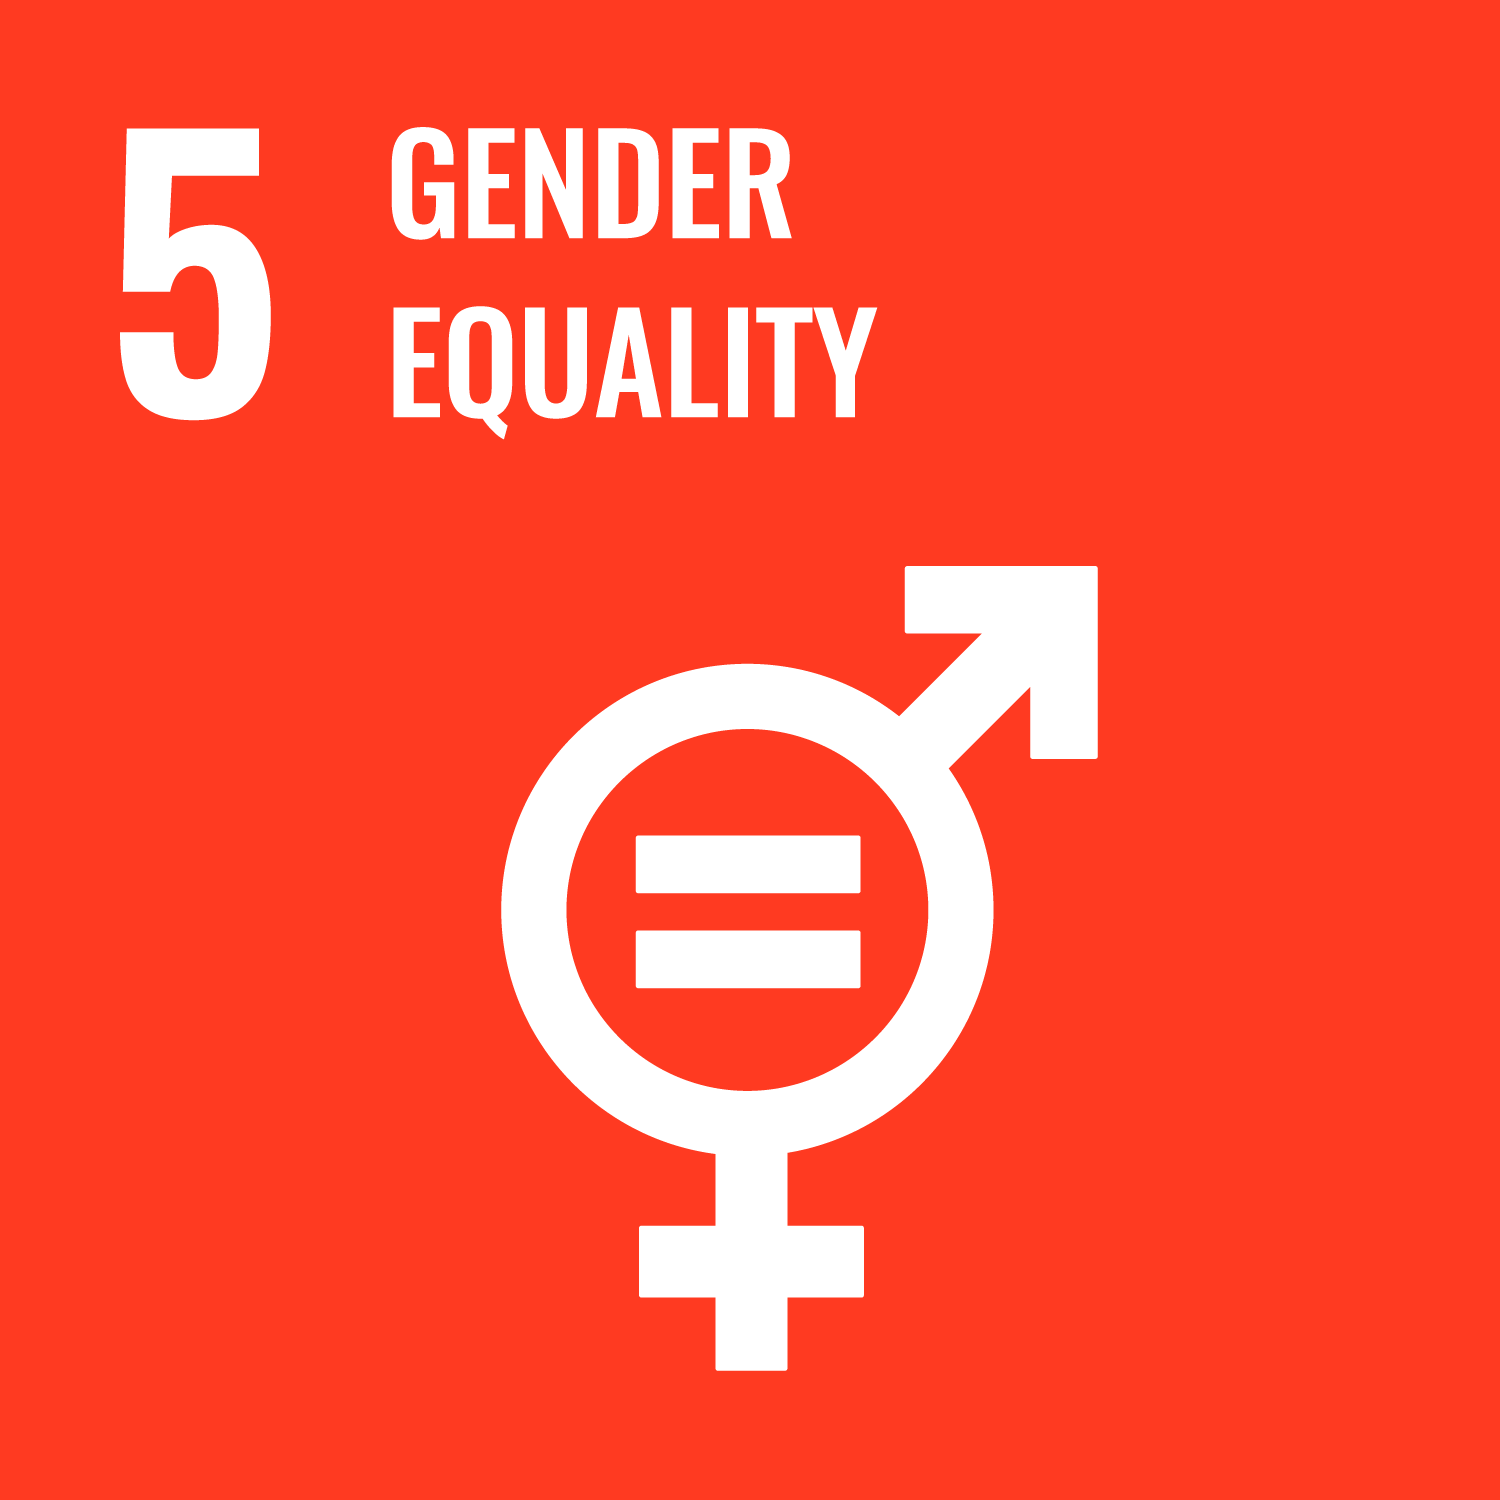 Gender equality and women’s empowerment